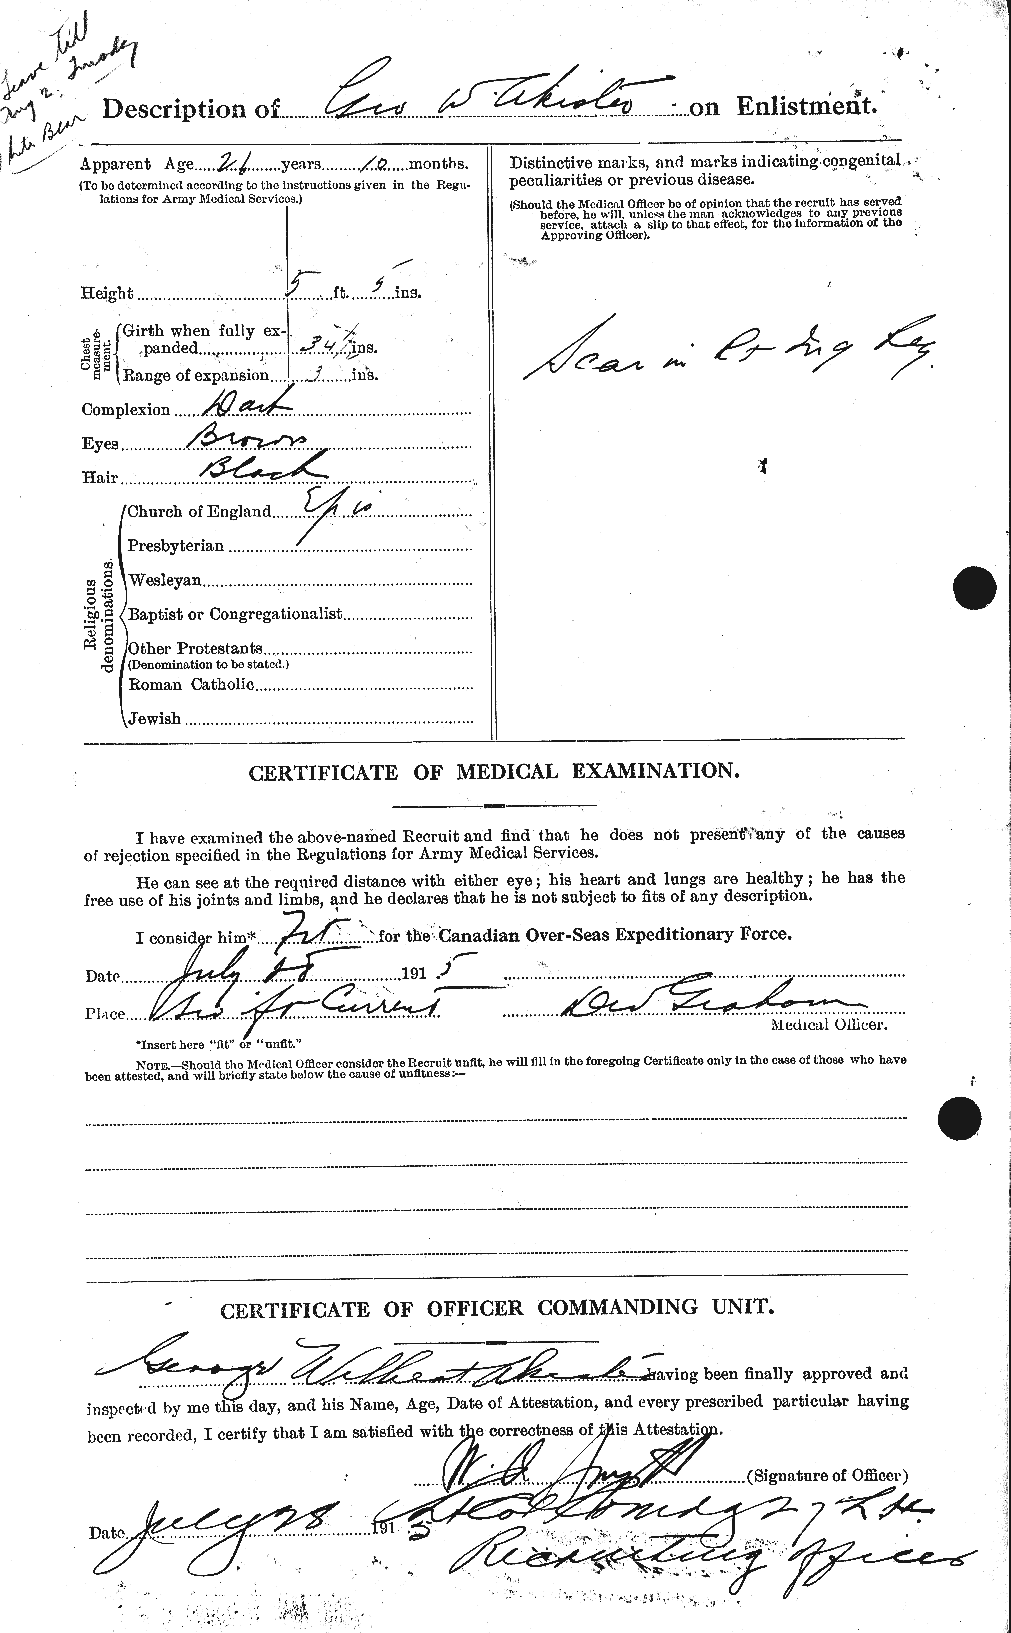 Personnel Records of the First World War - CEF 203585b